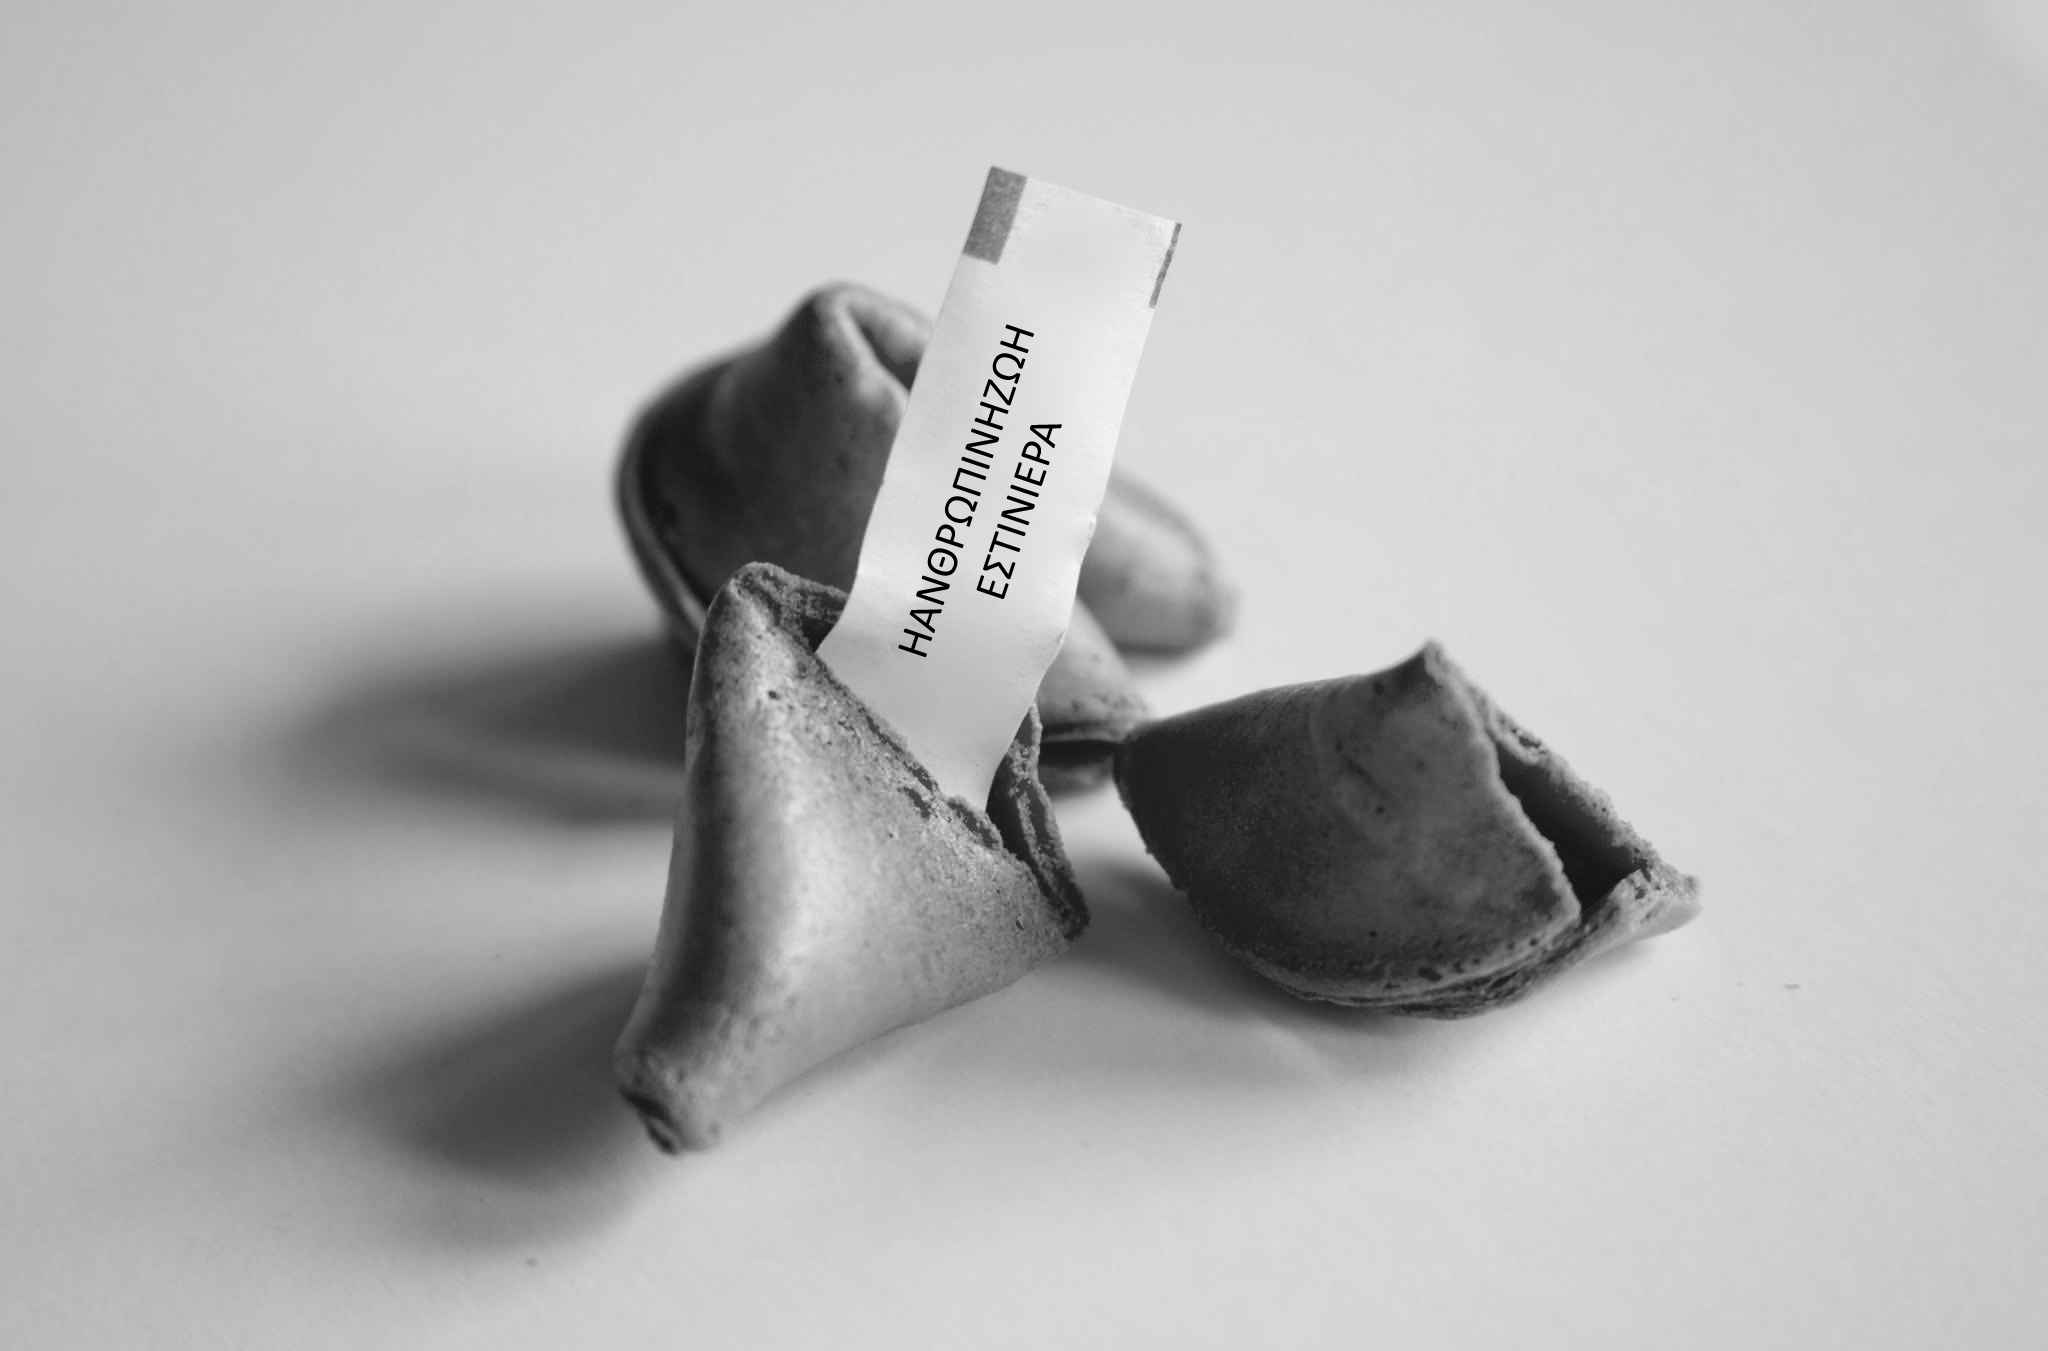 A black and white photograph of a broken fortune cookie. The fortune reads "ΗΑΝΘΡΩΠΙΝΗΖΩΗΕΣΤΙΝΙΕΡΑ".